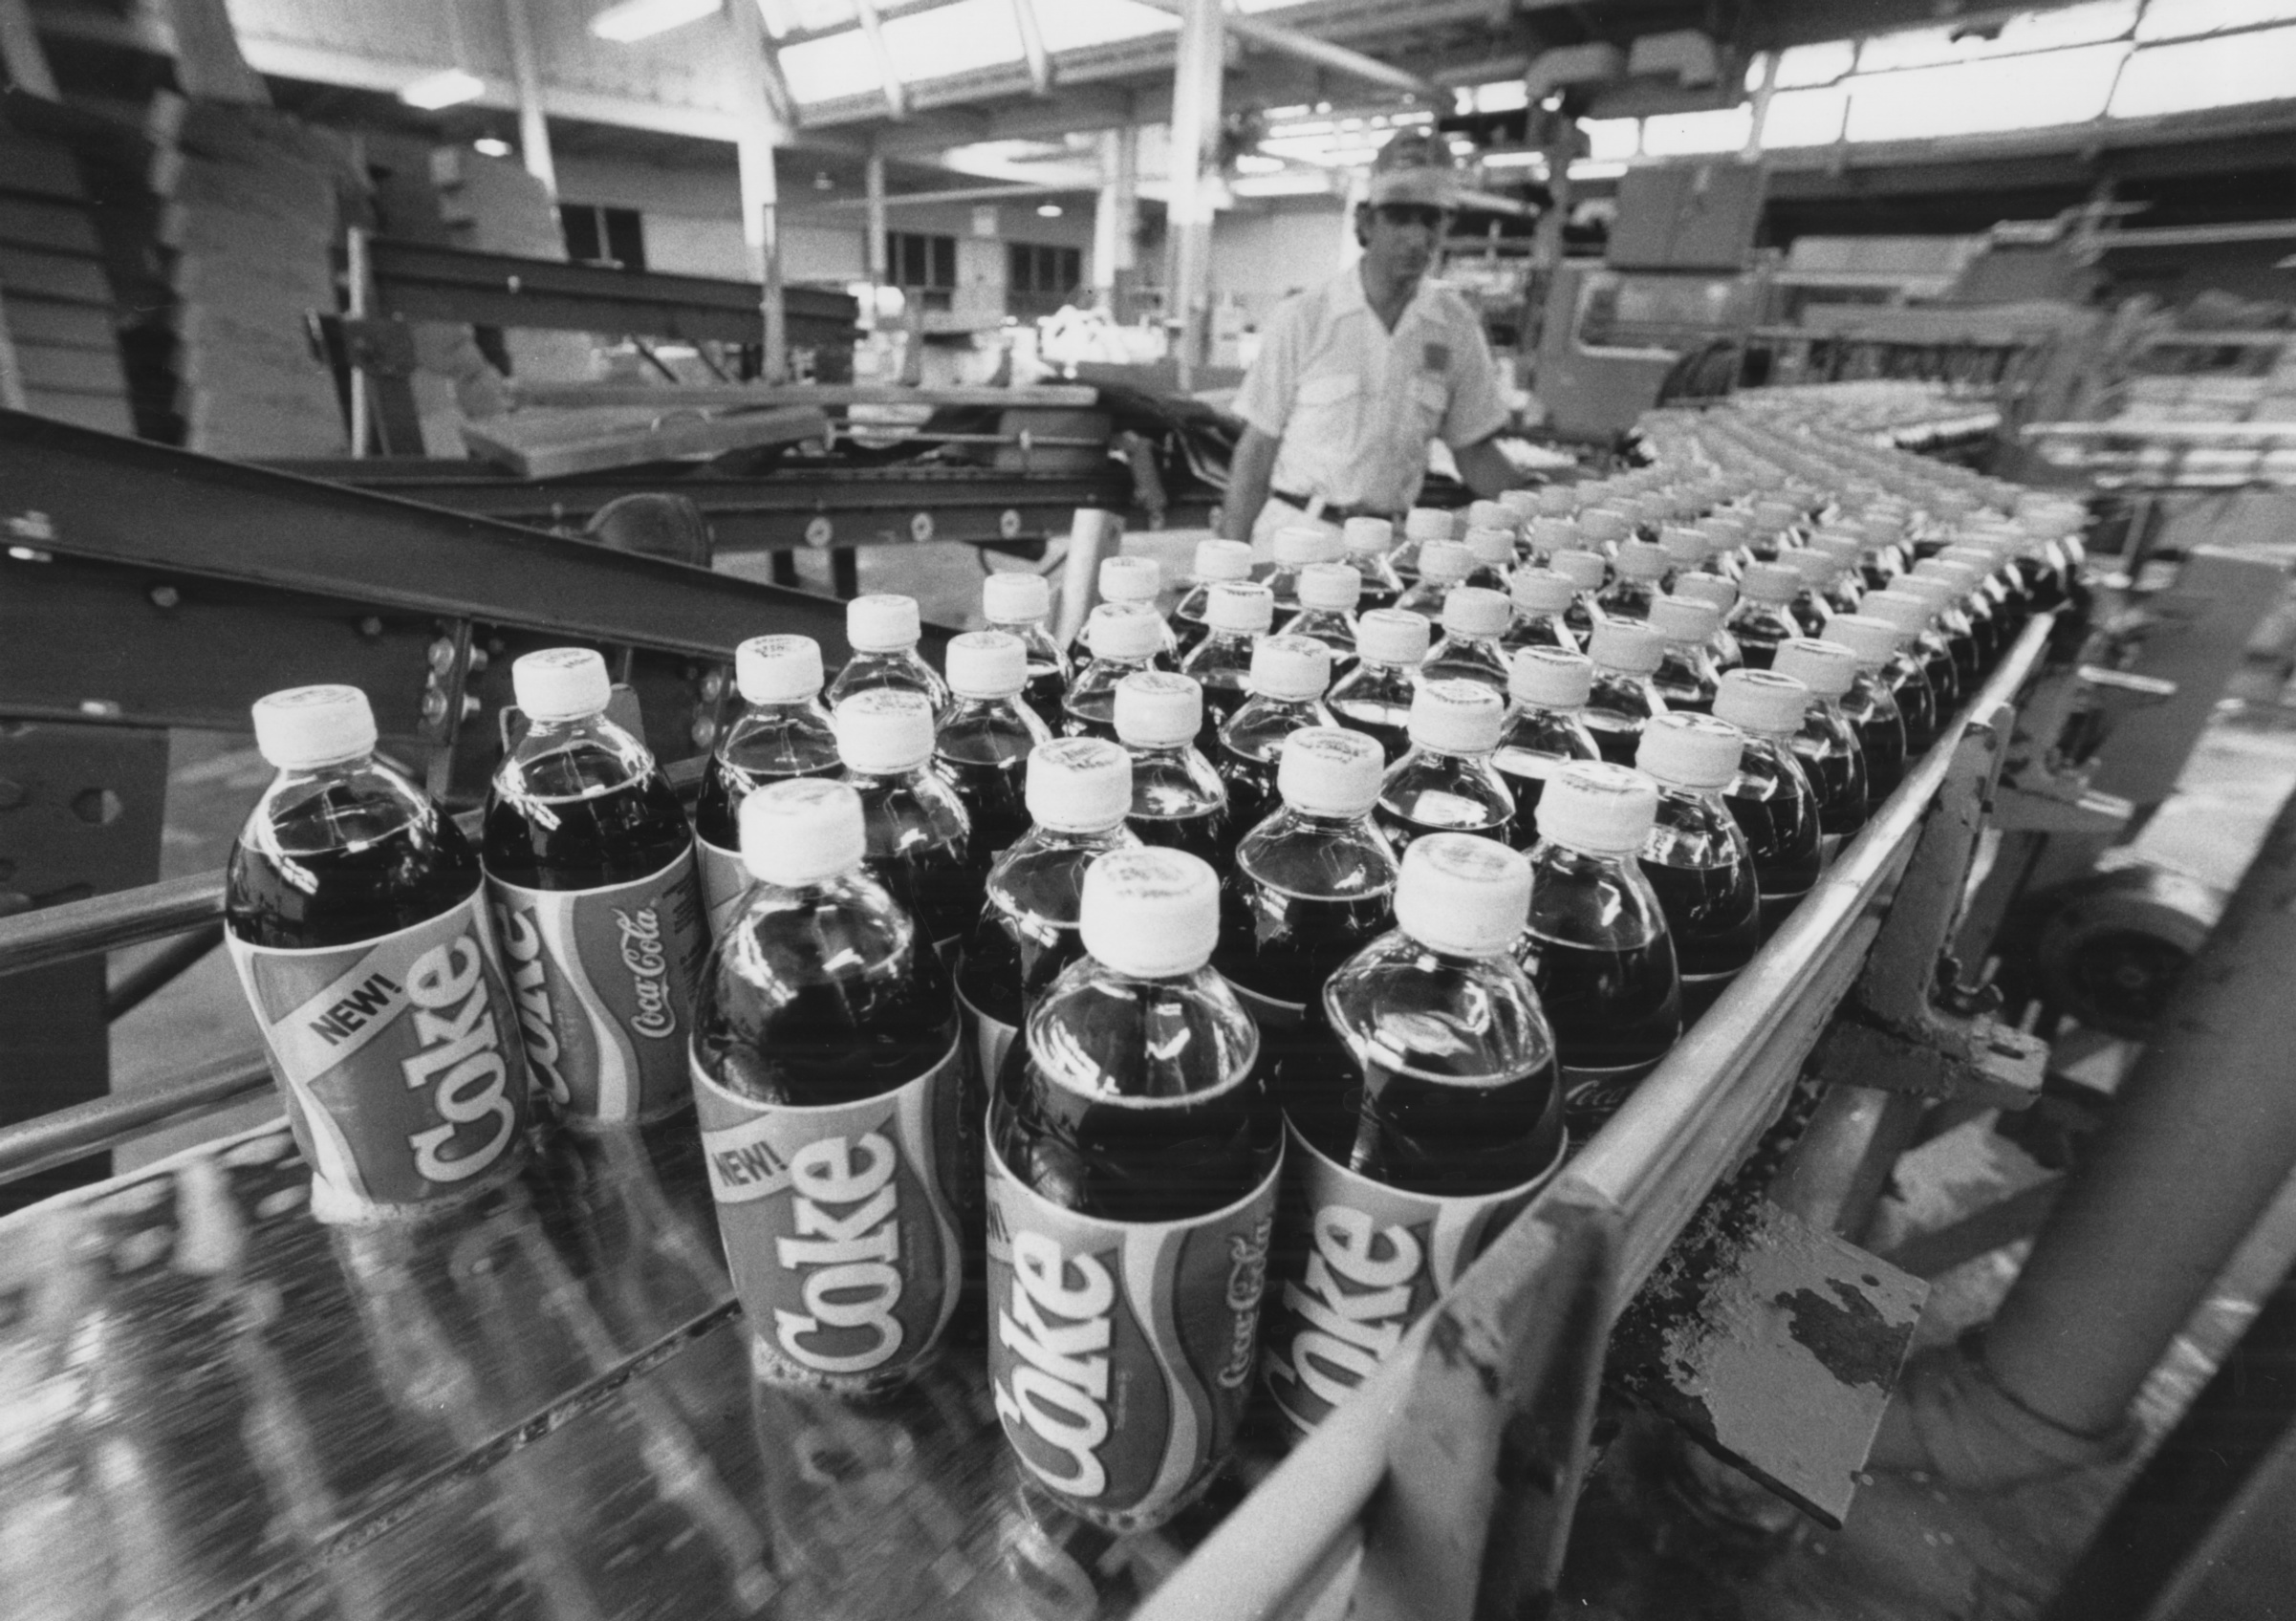 When New Coke made its disastrous debut in 1985